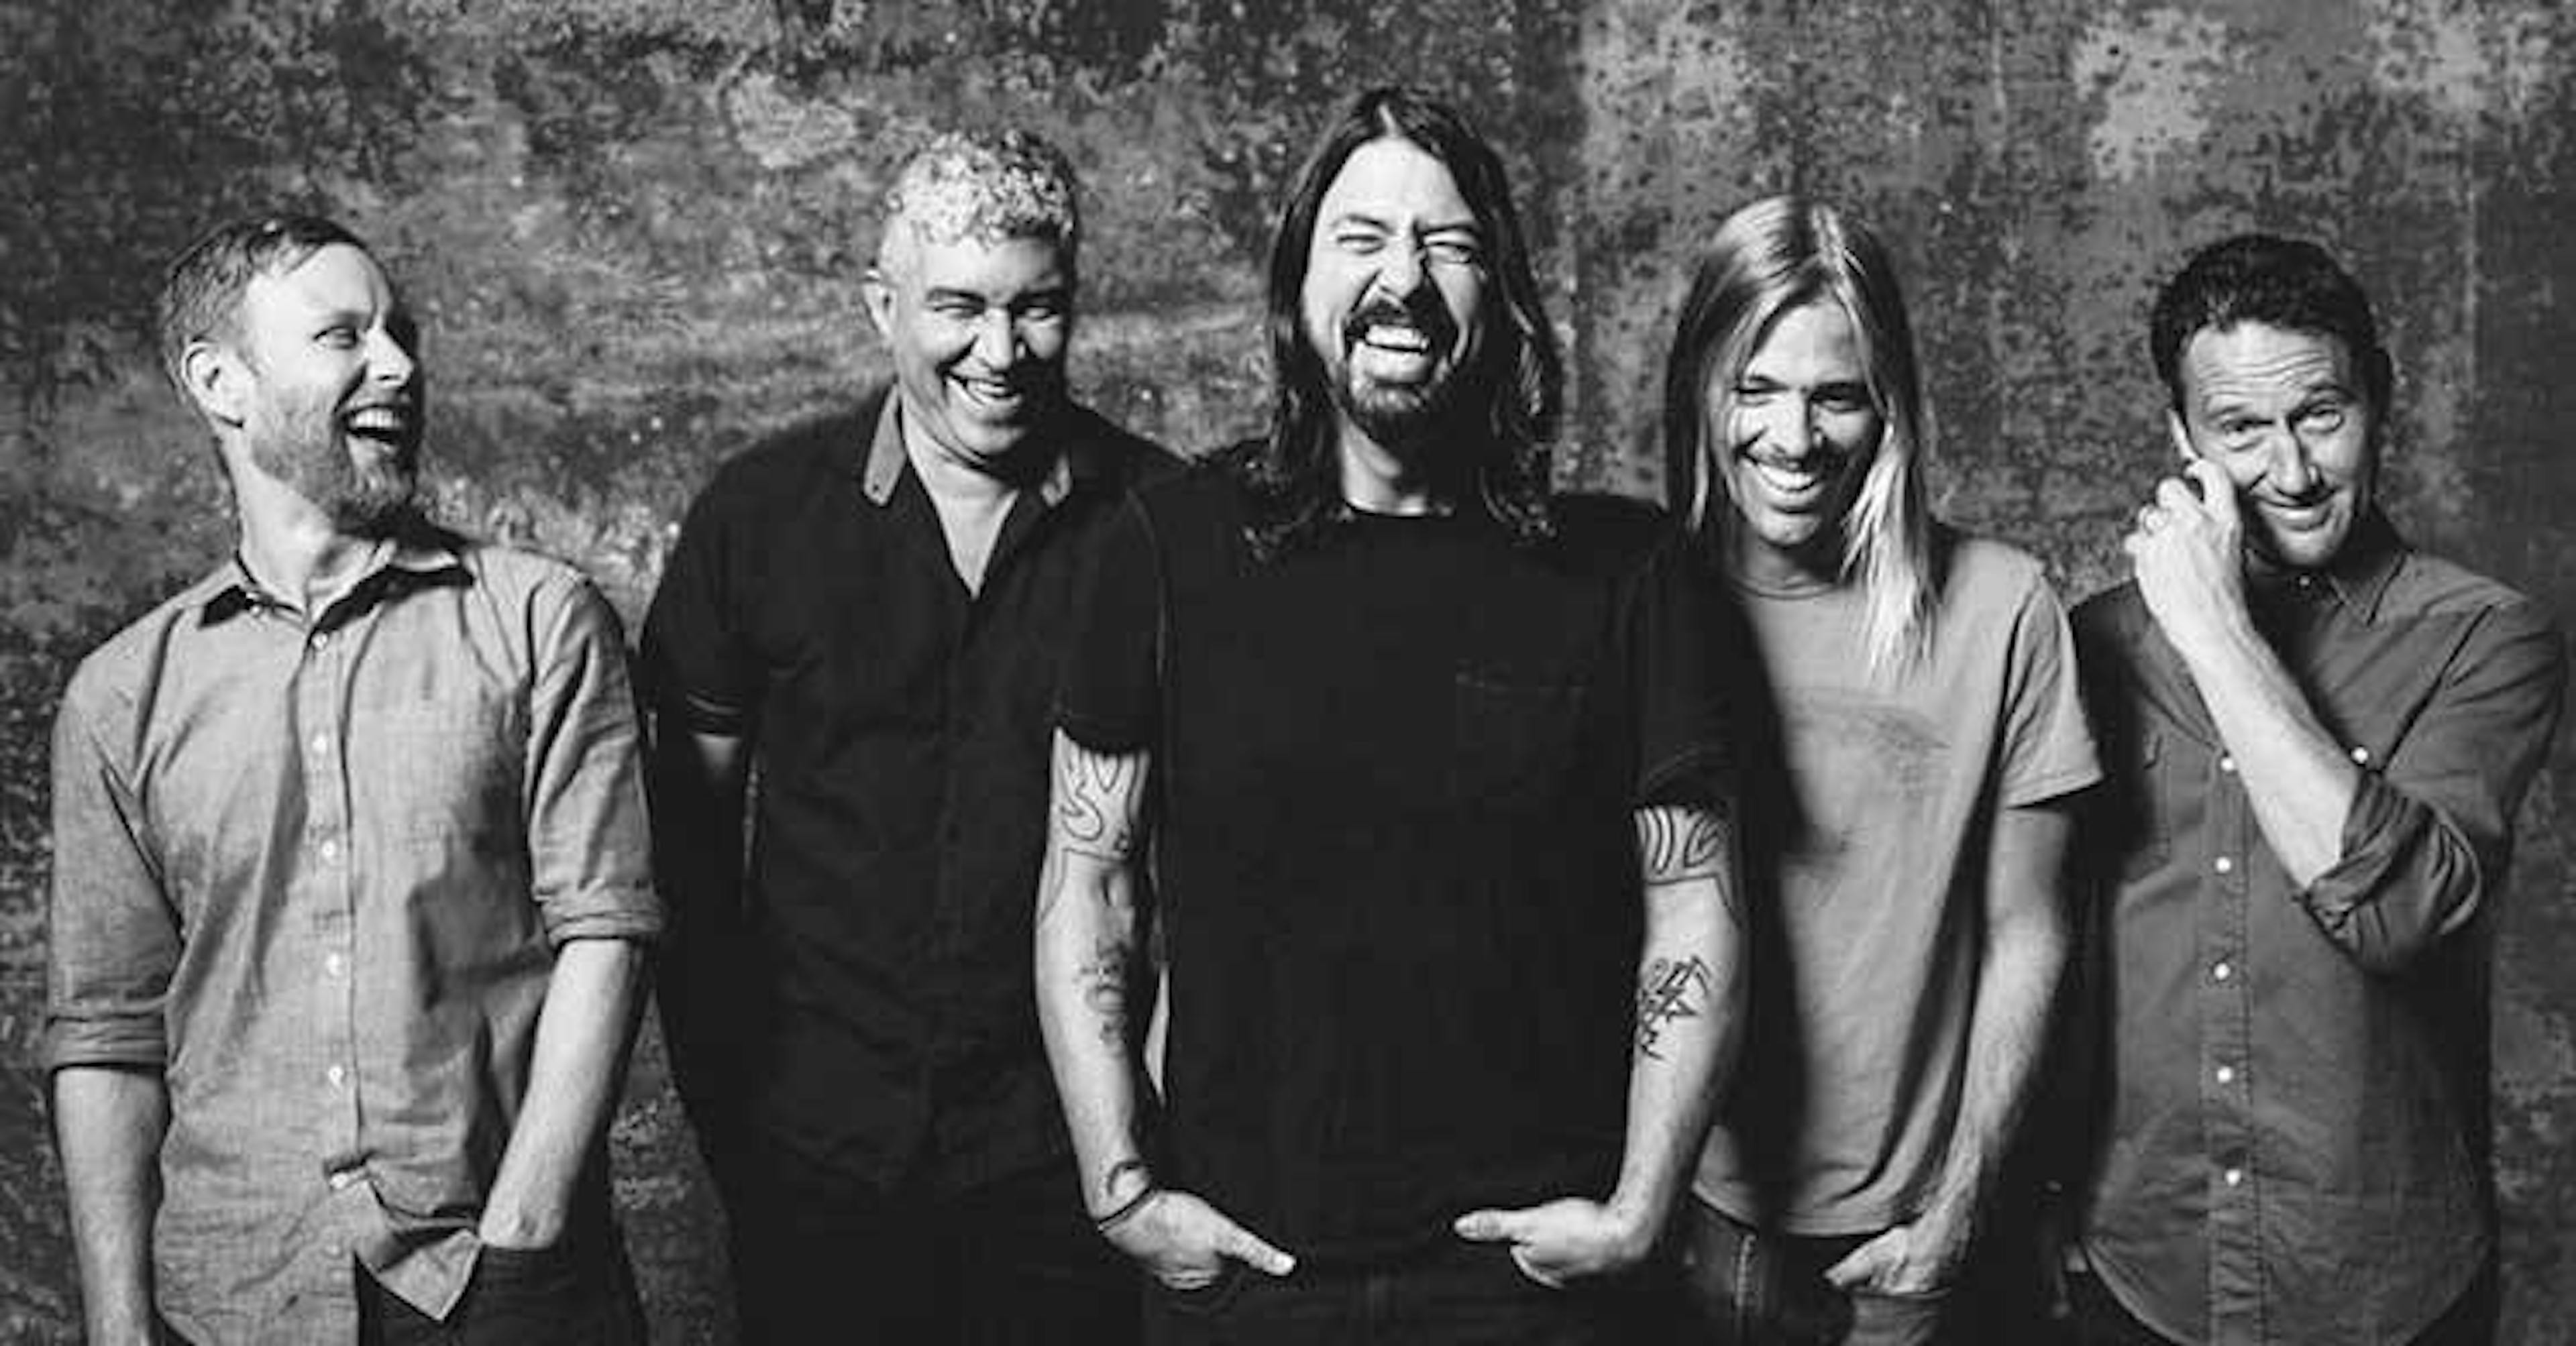 Watch Dave Grohl Face The Muppets’ Animal In The Ultimate Drum-Off